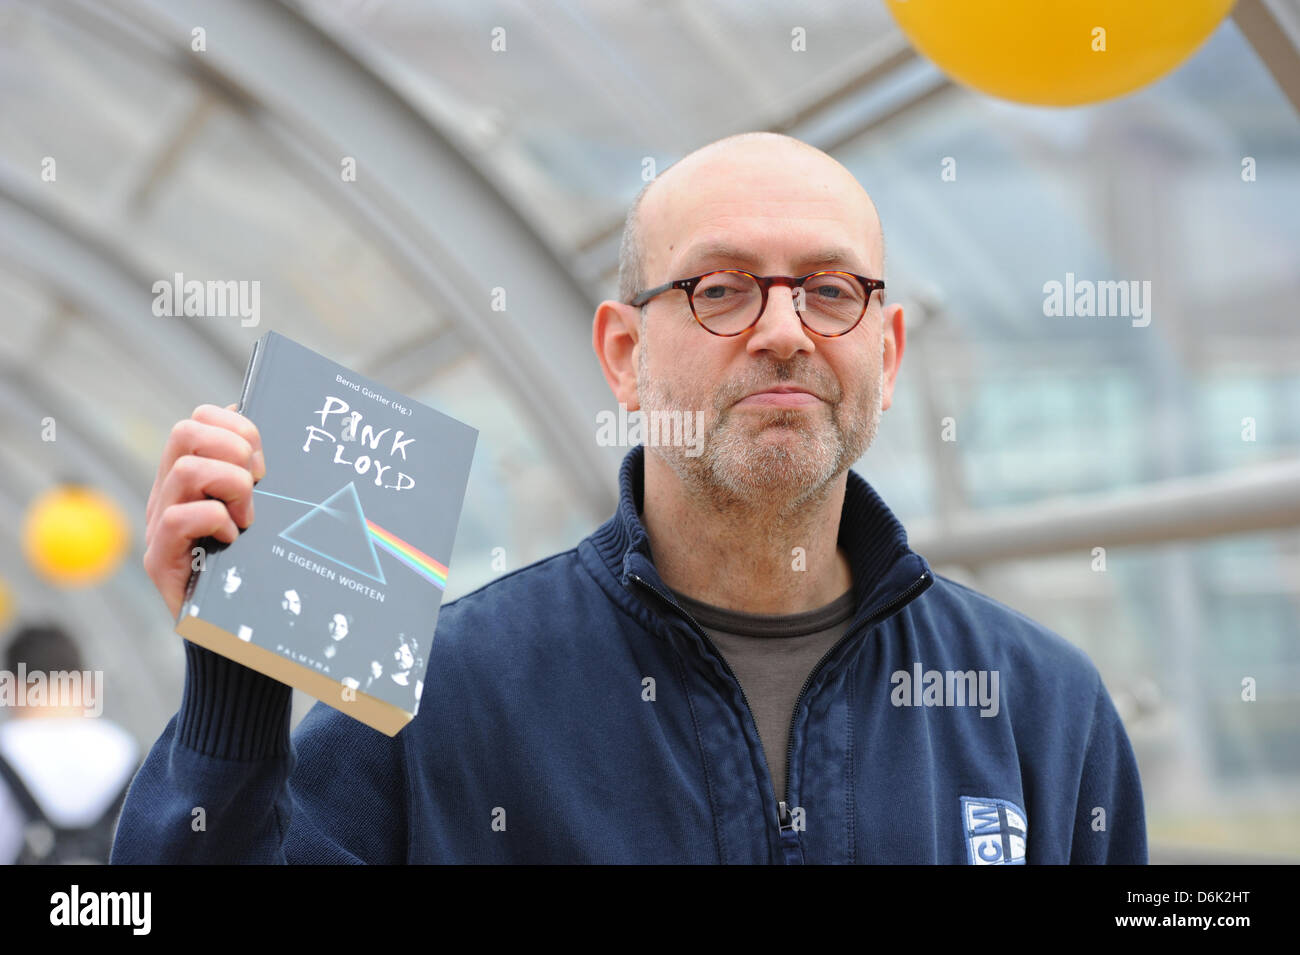 German writer and editor Bernd Guertler poses with his book about the band 'pink Floyd' at the Leipzig Book Fair in Leipzig, Germany, 15 March 2012. Sherko Fatah is the son of man from Iraqi Kurdistan and a German mother and spent the first years of his childhood in the GDR. Photo: Jens Kalaene Stock Photo